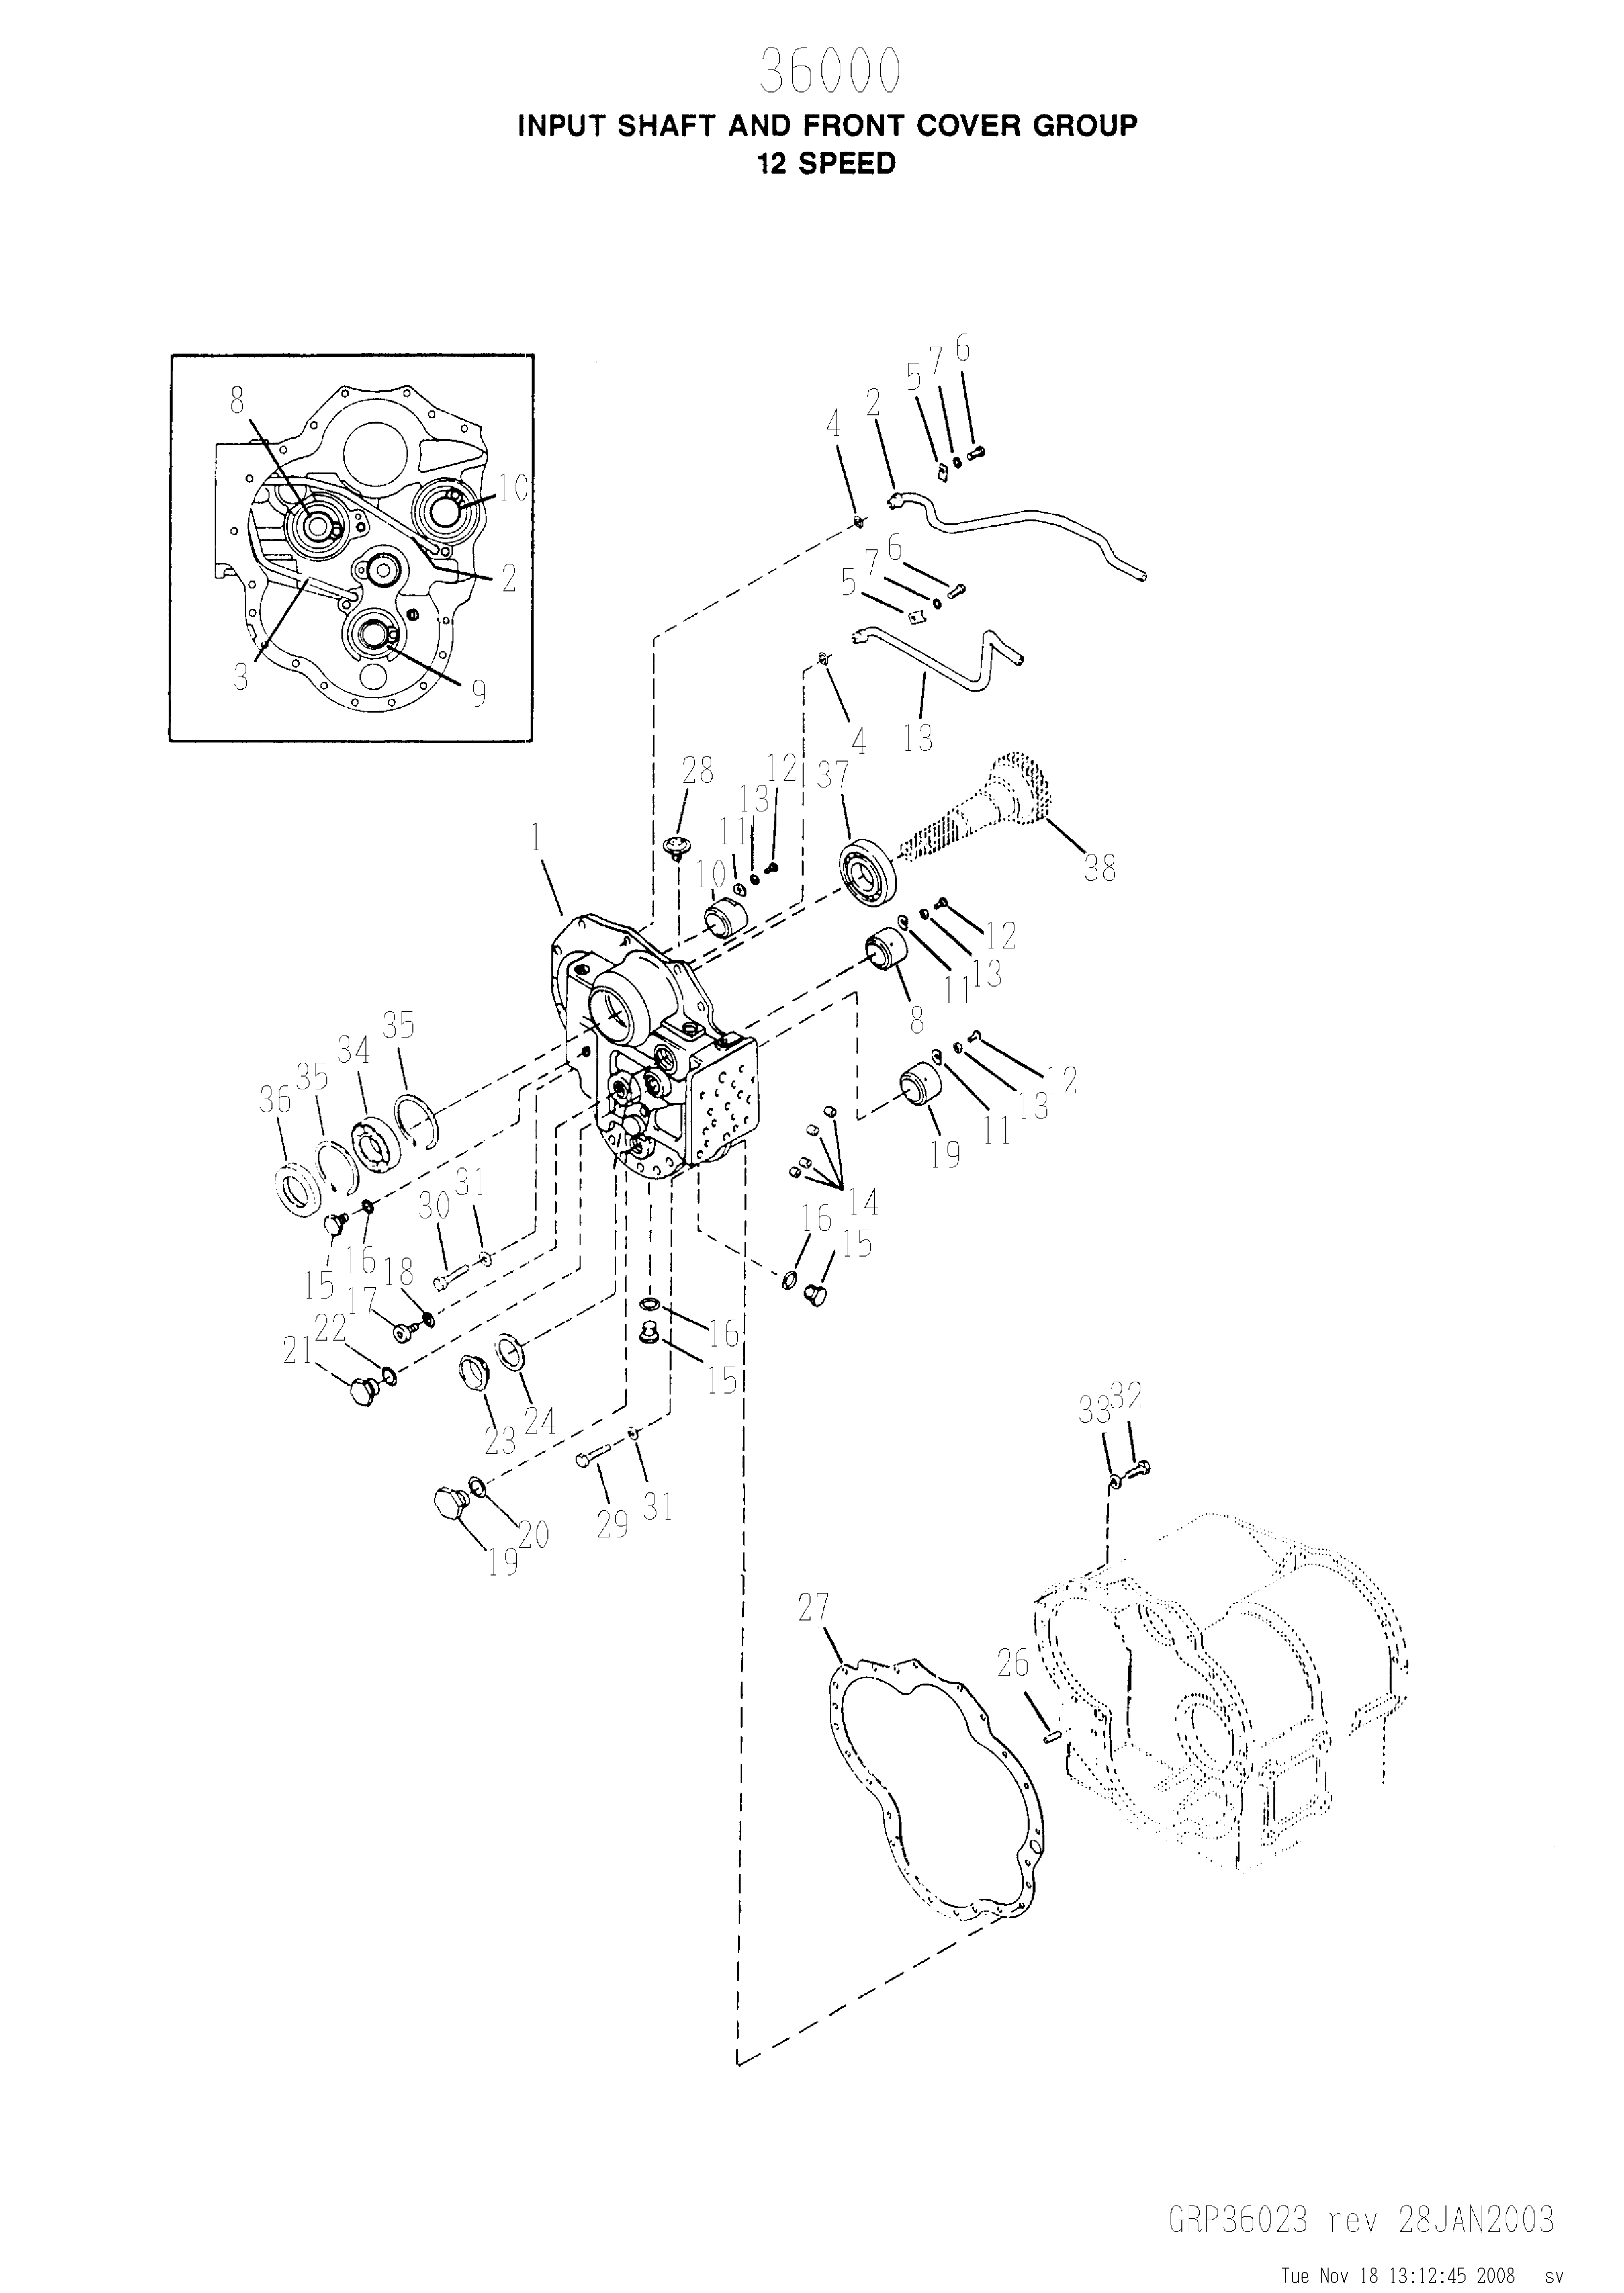 drawing for KAMAG 61300155 - SCREW (figure 4)